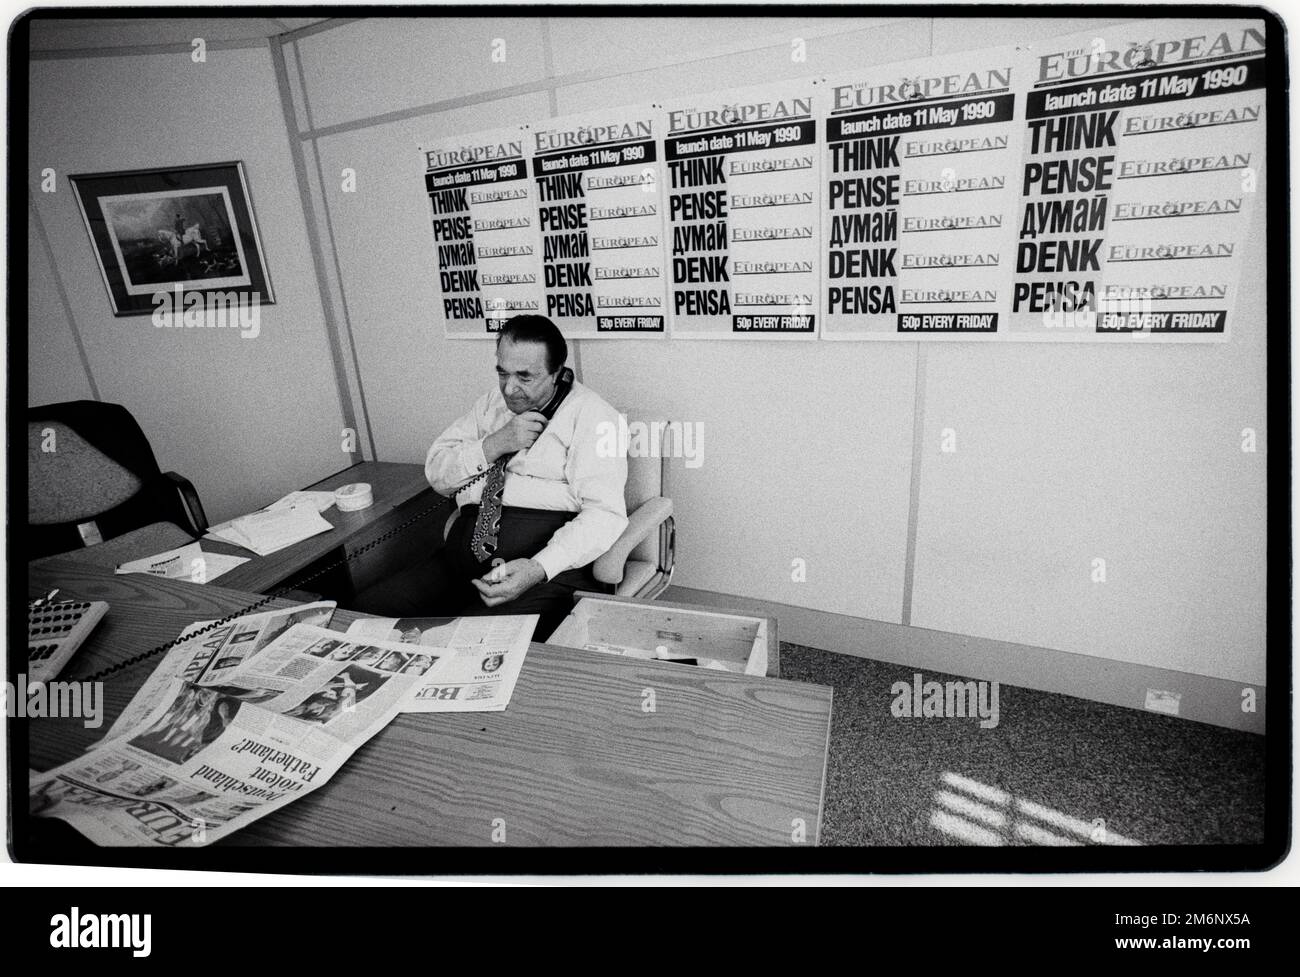 Robert Maxwell on the editorial floor of the European Newspaper. May 1990 Ian Robert Maxwell, MC (10 June 1923 – 5 November 1991) was a Czechoslovakian-born British media proprietor and Member of Parliament (MP). He rose from poverty to build an extensive publishing empire. His death revealed huge discrepancies in his companies' finances, including the Mirror Group pension fund, which Maxwell had fraudulently misappropriated. seen here on the editorial floor of the european Newspaper 1990  He escaped from Nazi occupation, joining the Czechoslovak Army in exile in World War II and then fighting Stock Photo